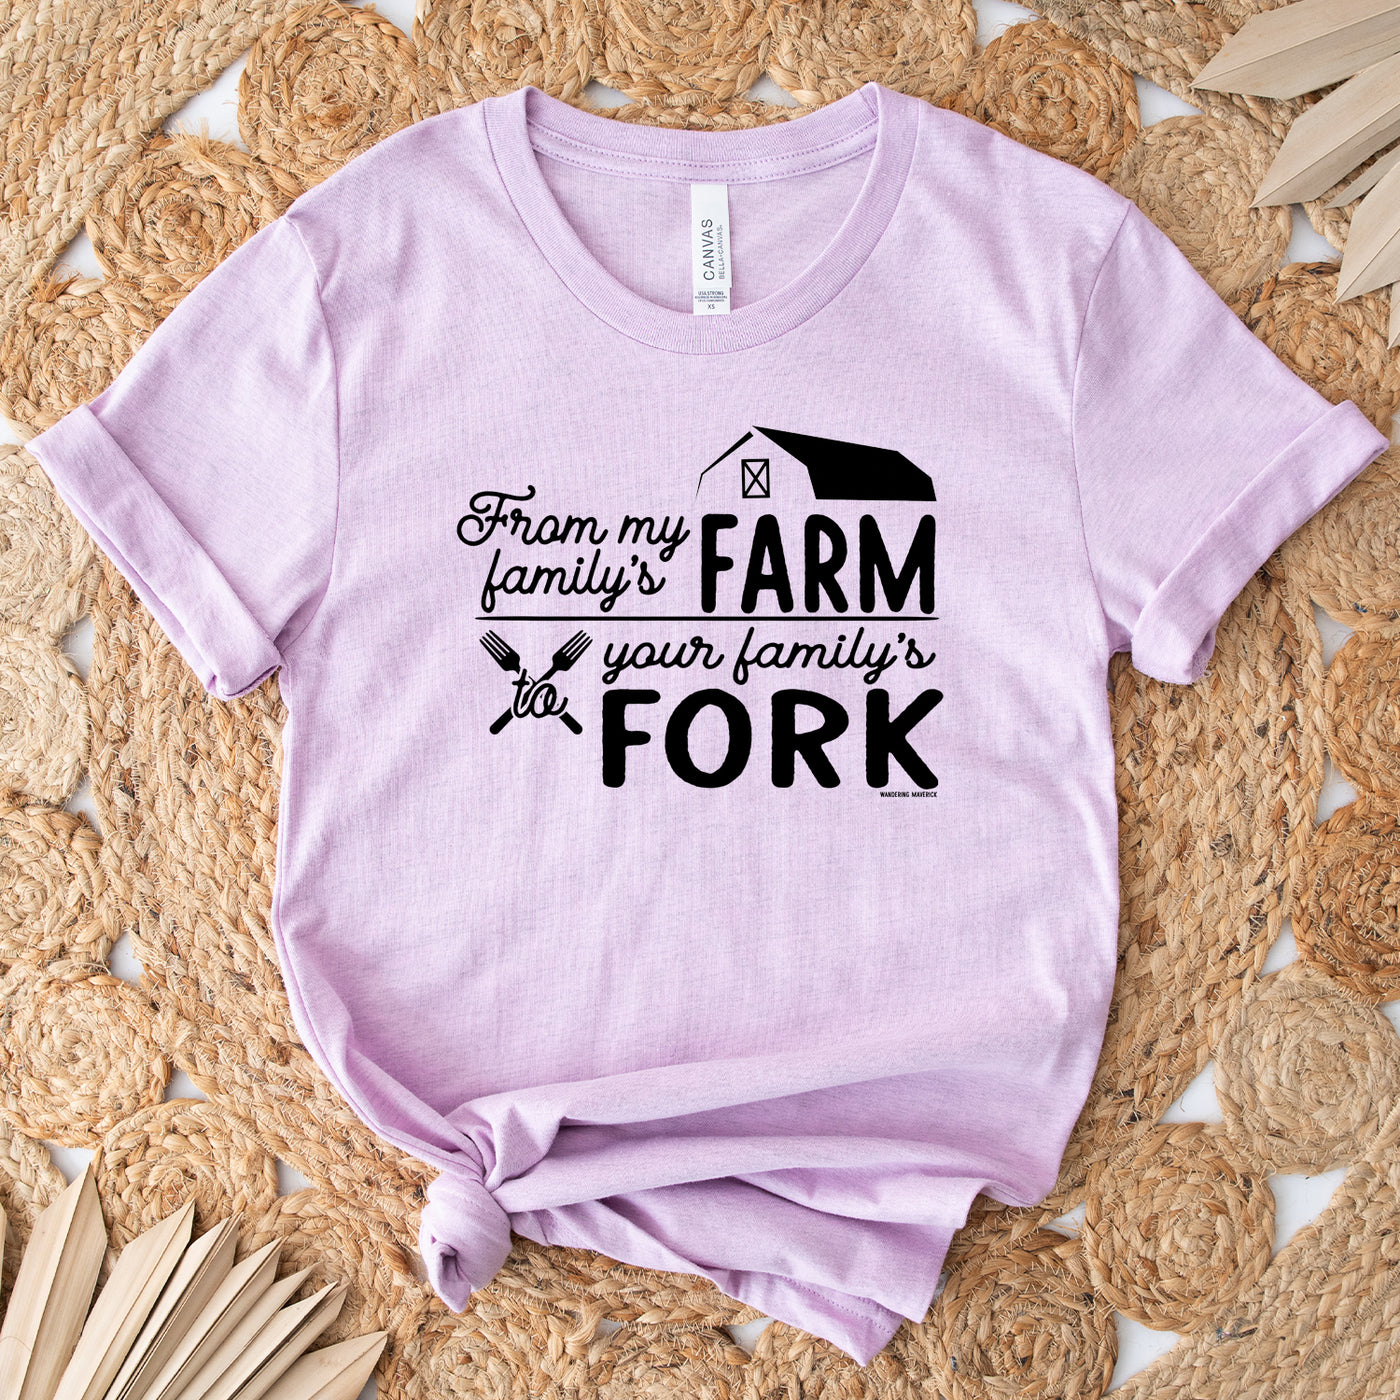 From My Family's Farm To Your Family's Fork T-Shirt (XS-4XL) - Multiple Colors!